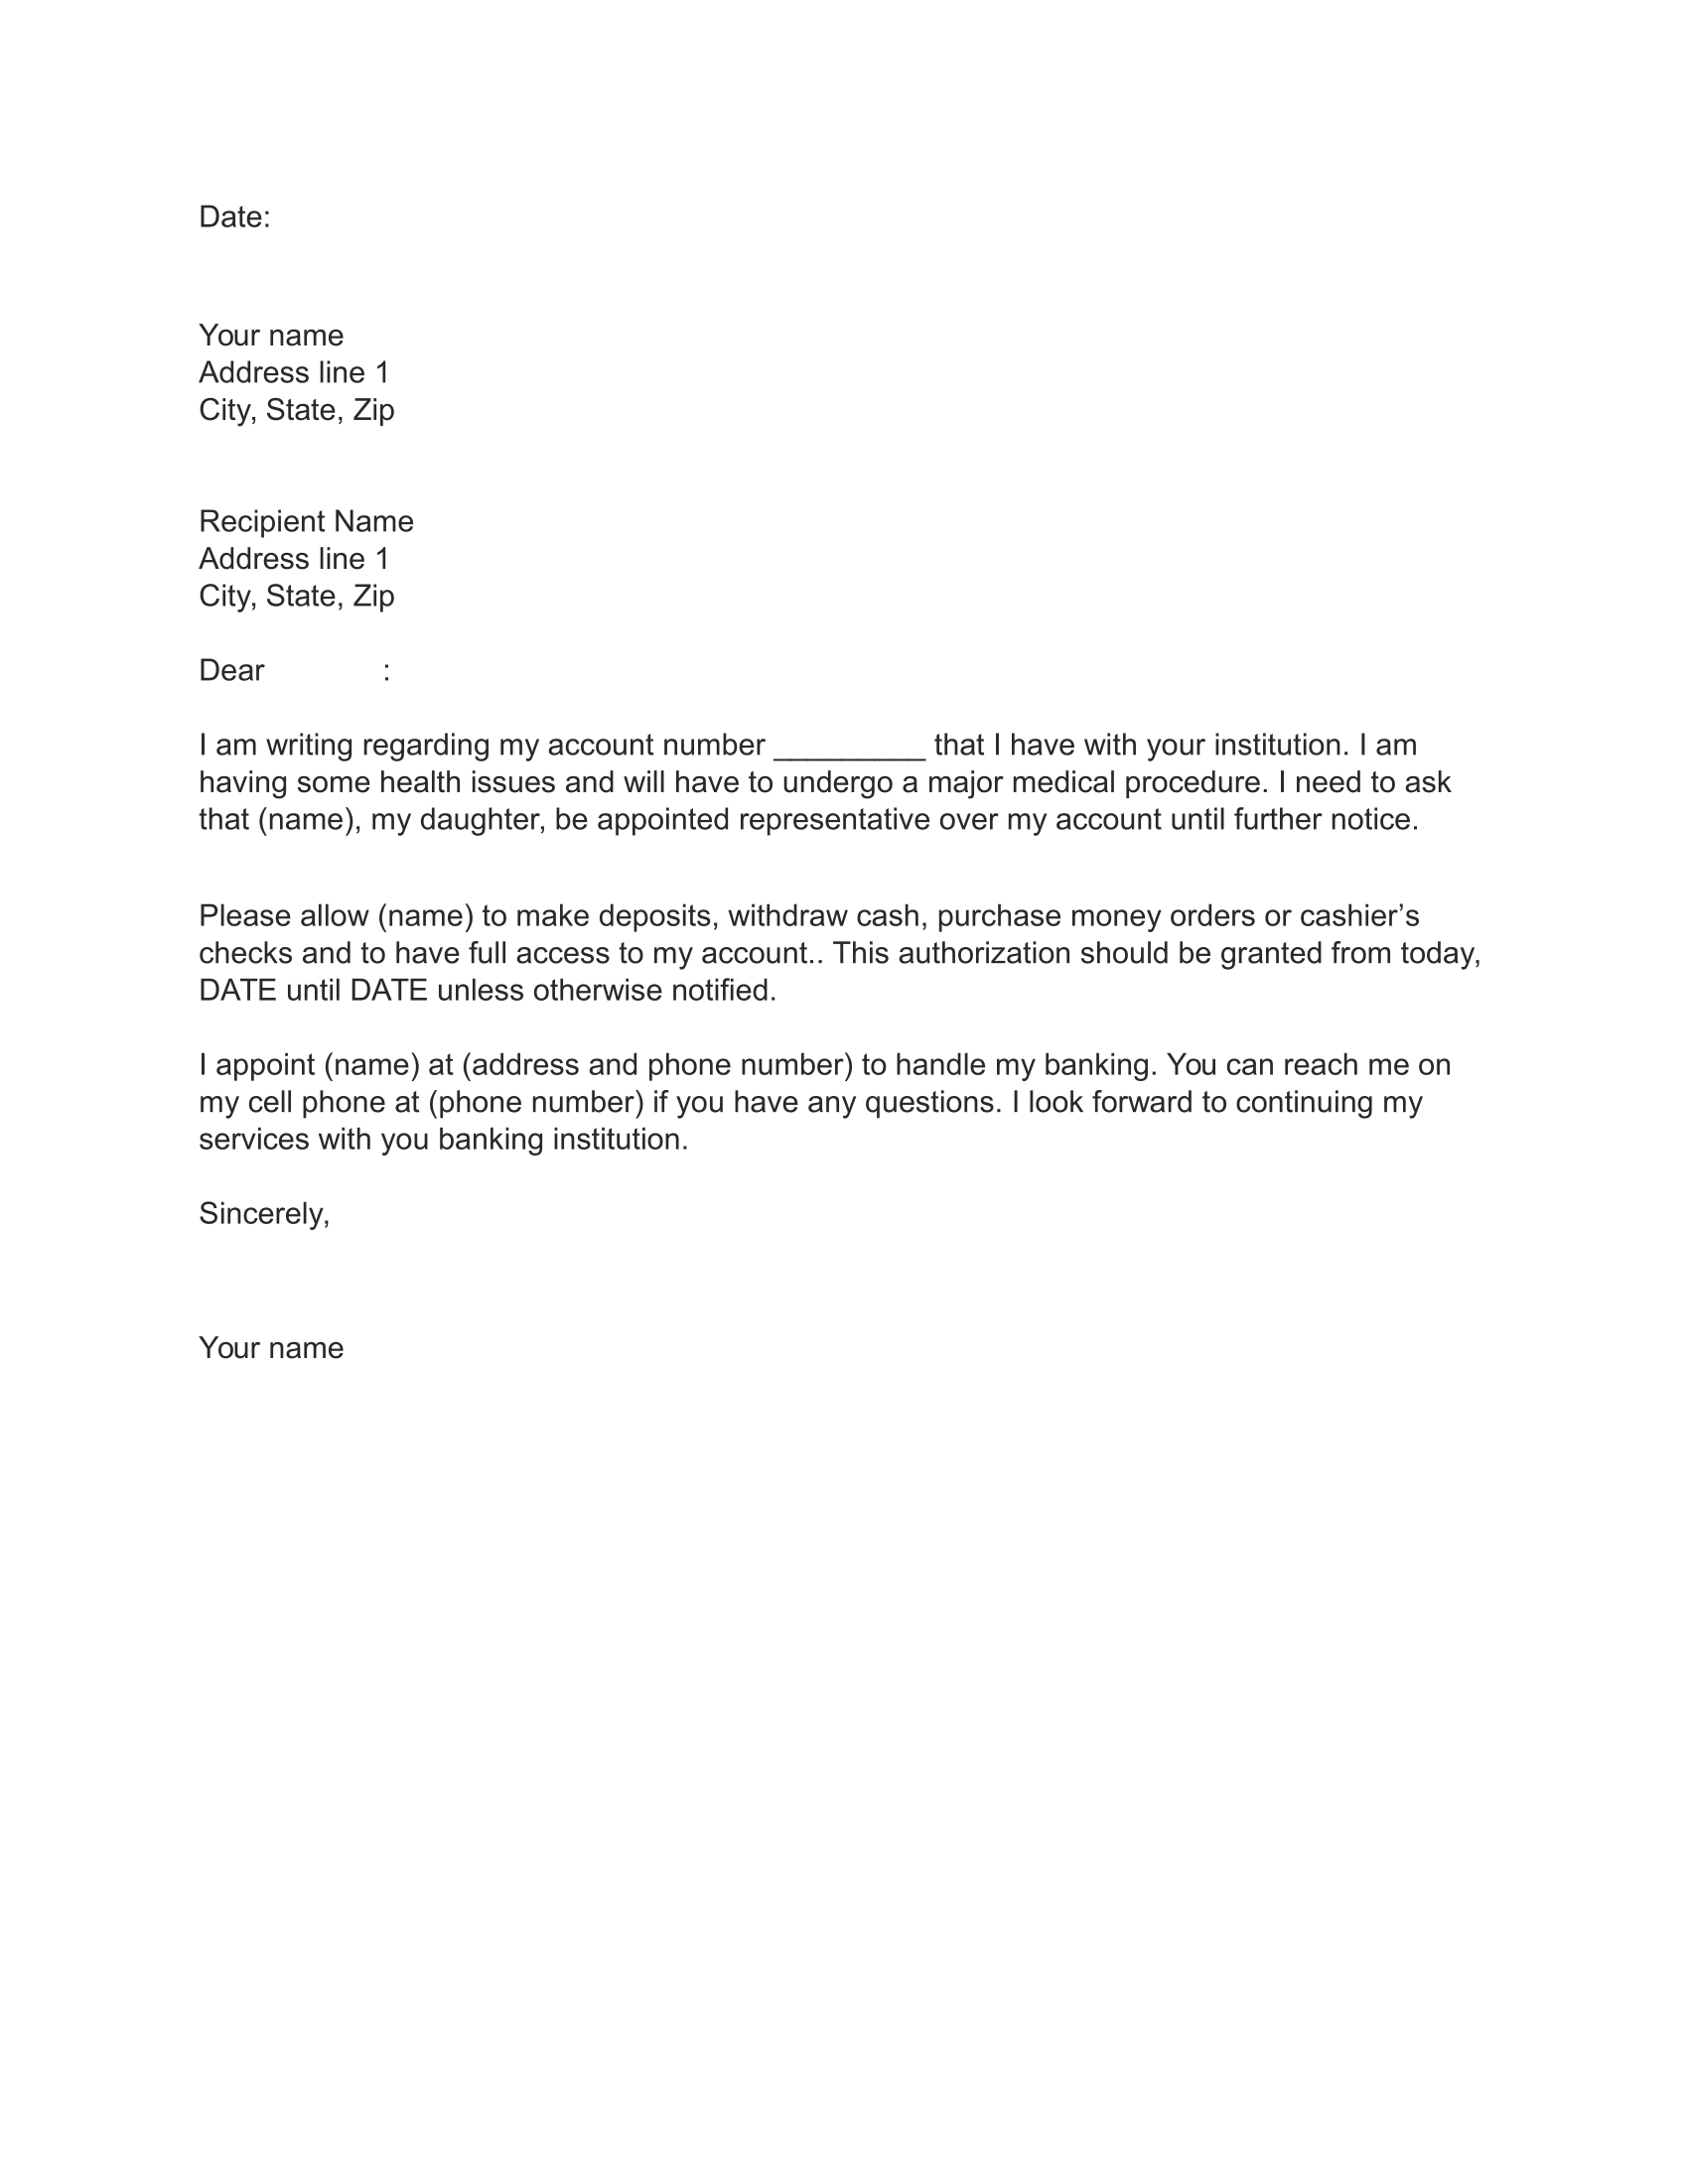 Letter Of Agency Template from officewriting.com